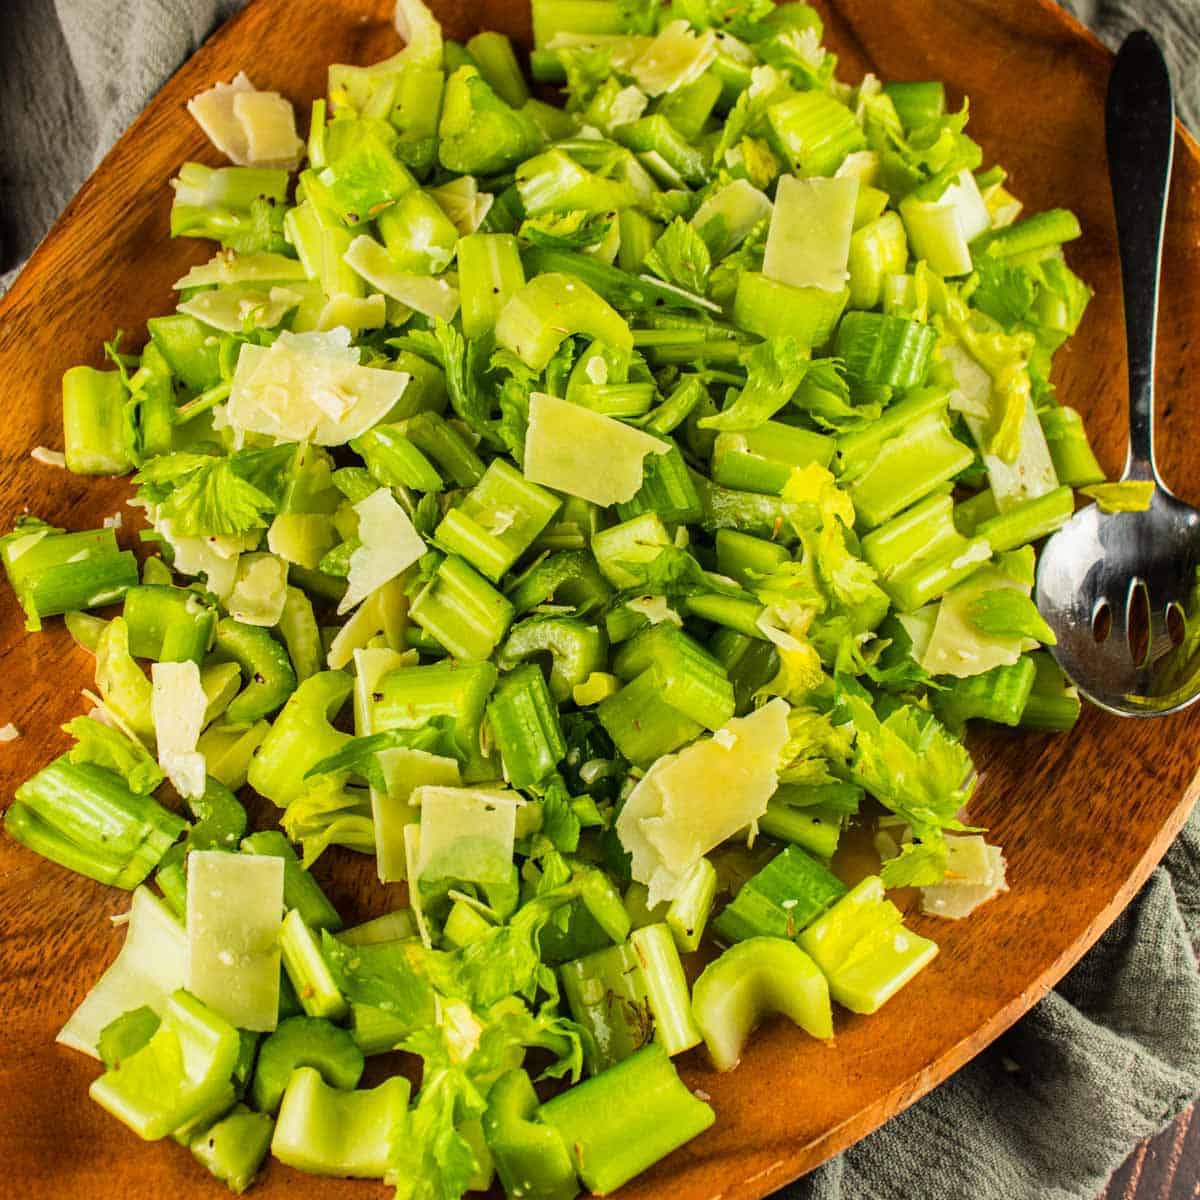 chopped celery salad with parmesan shavings on a wooden platter with a metal spoon